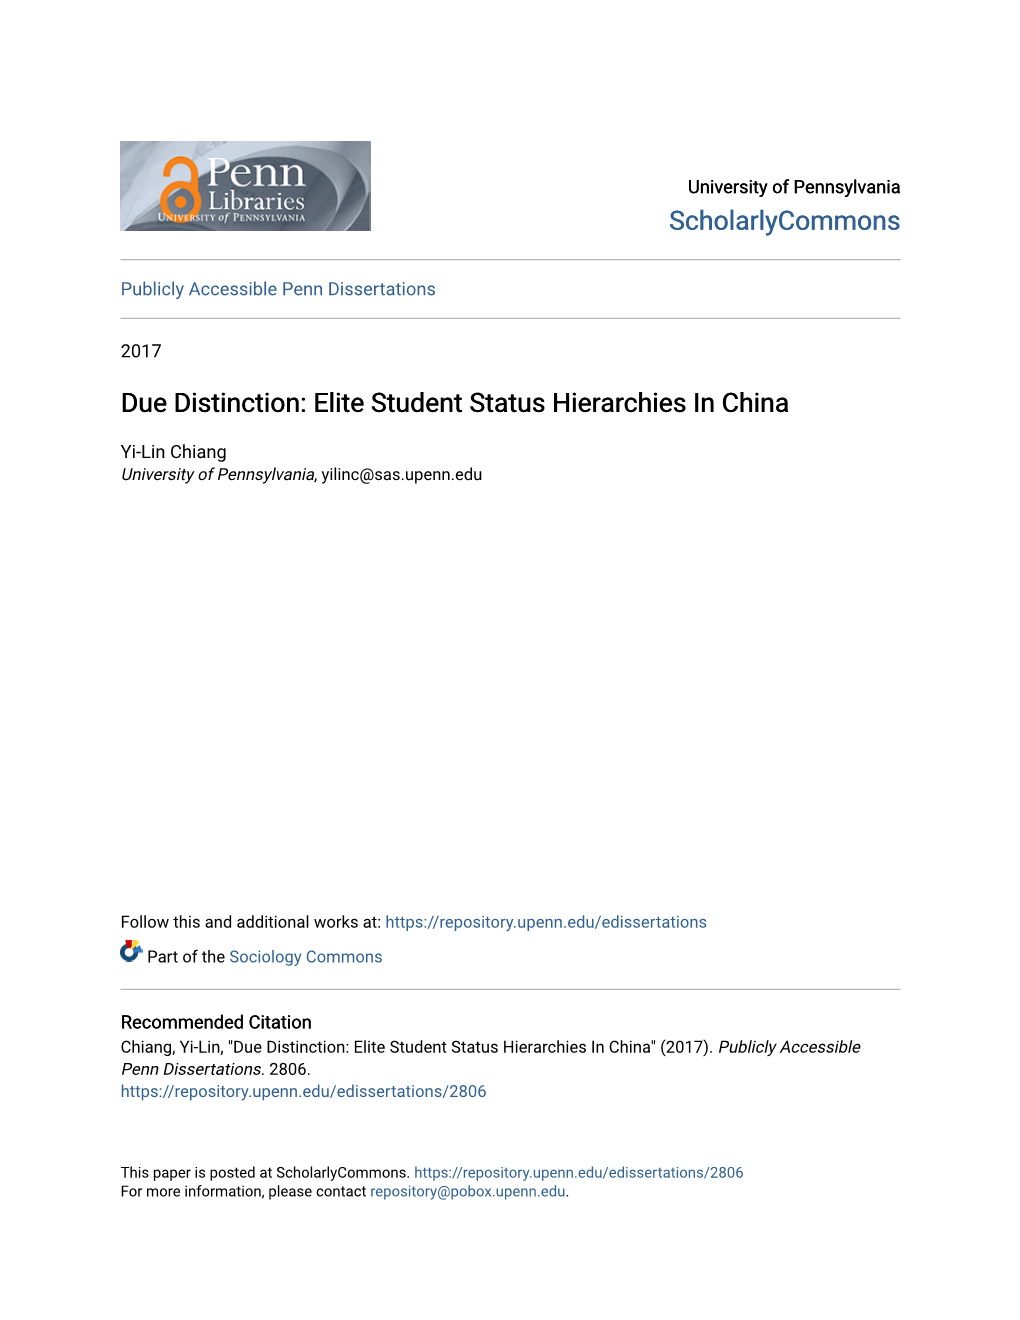 Due Distinction: Elite Student Status Hierarchies in China